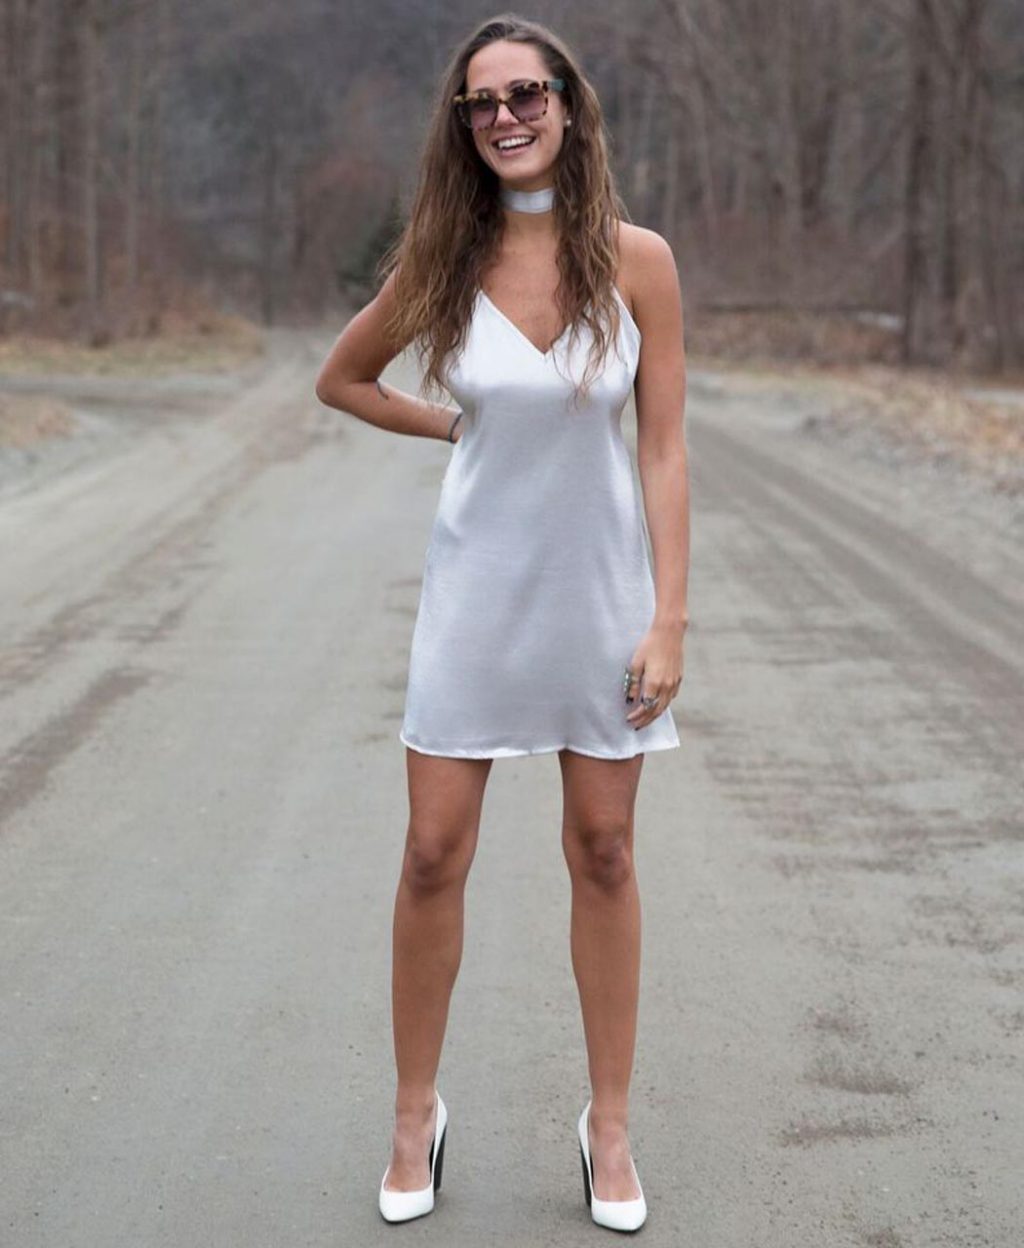 Slip Dress Outfit How to Wear a Slip Dress Outfit